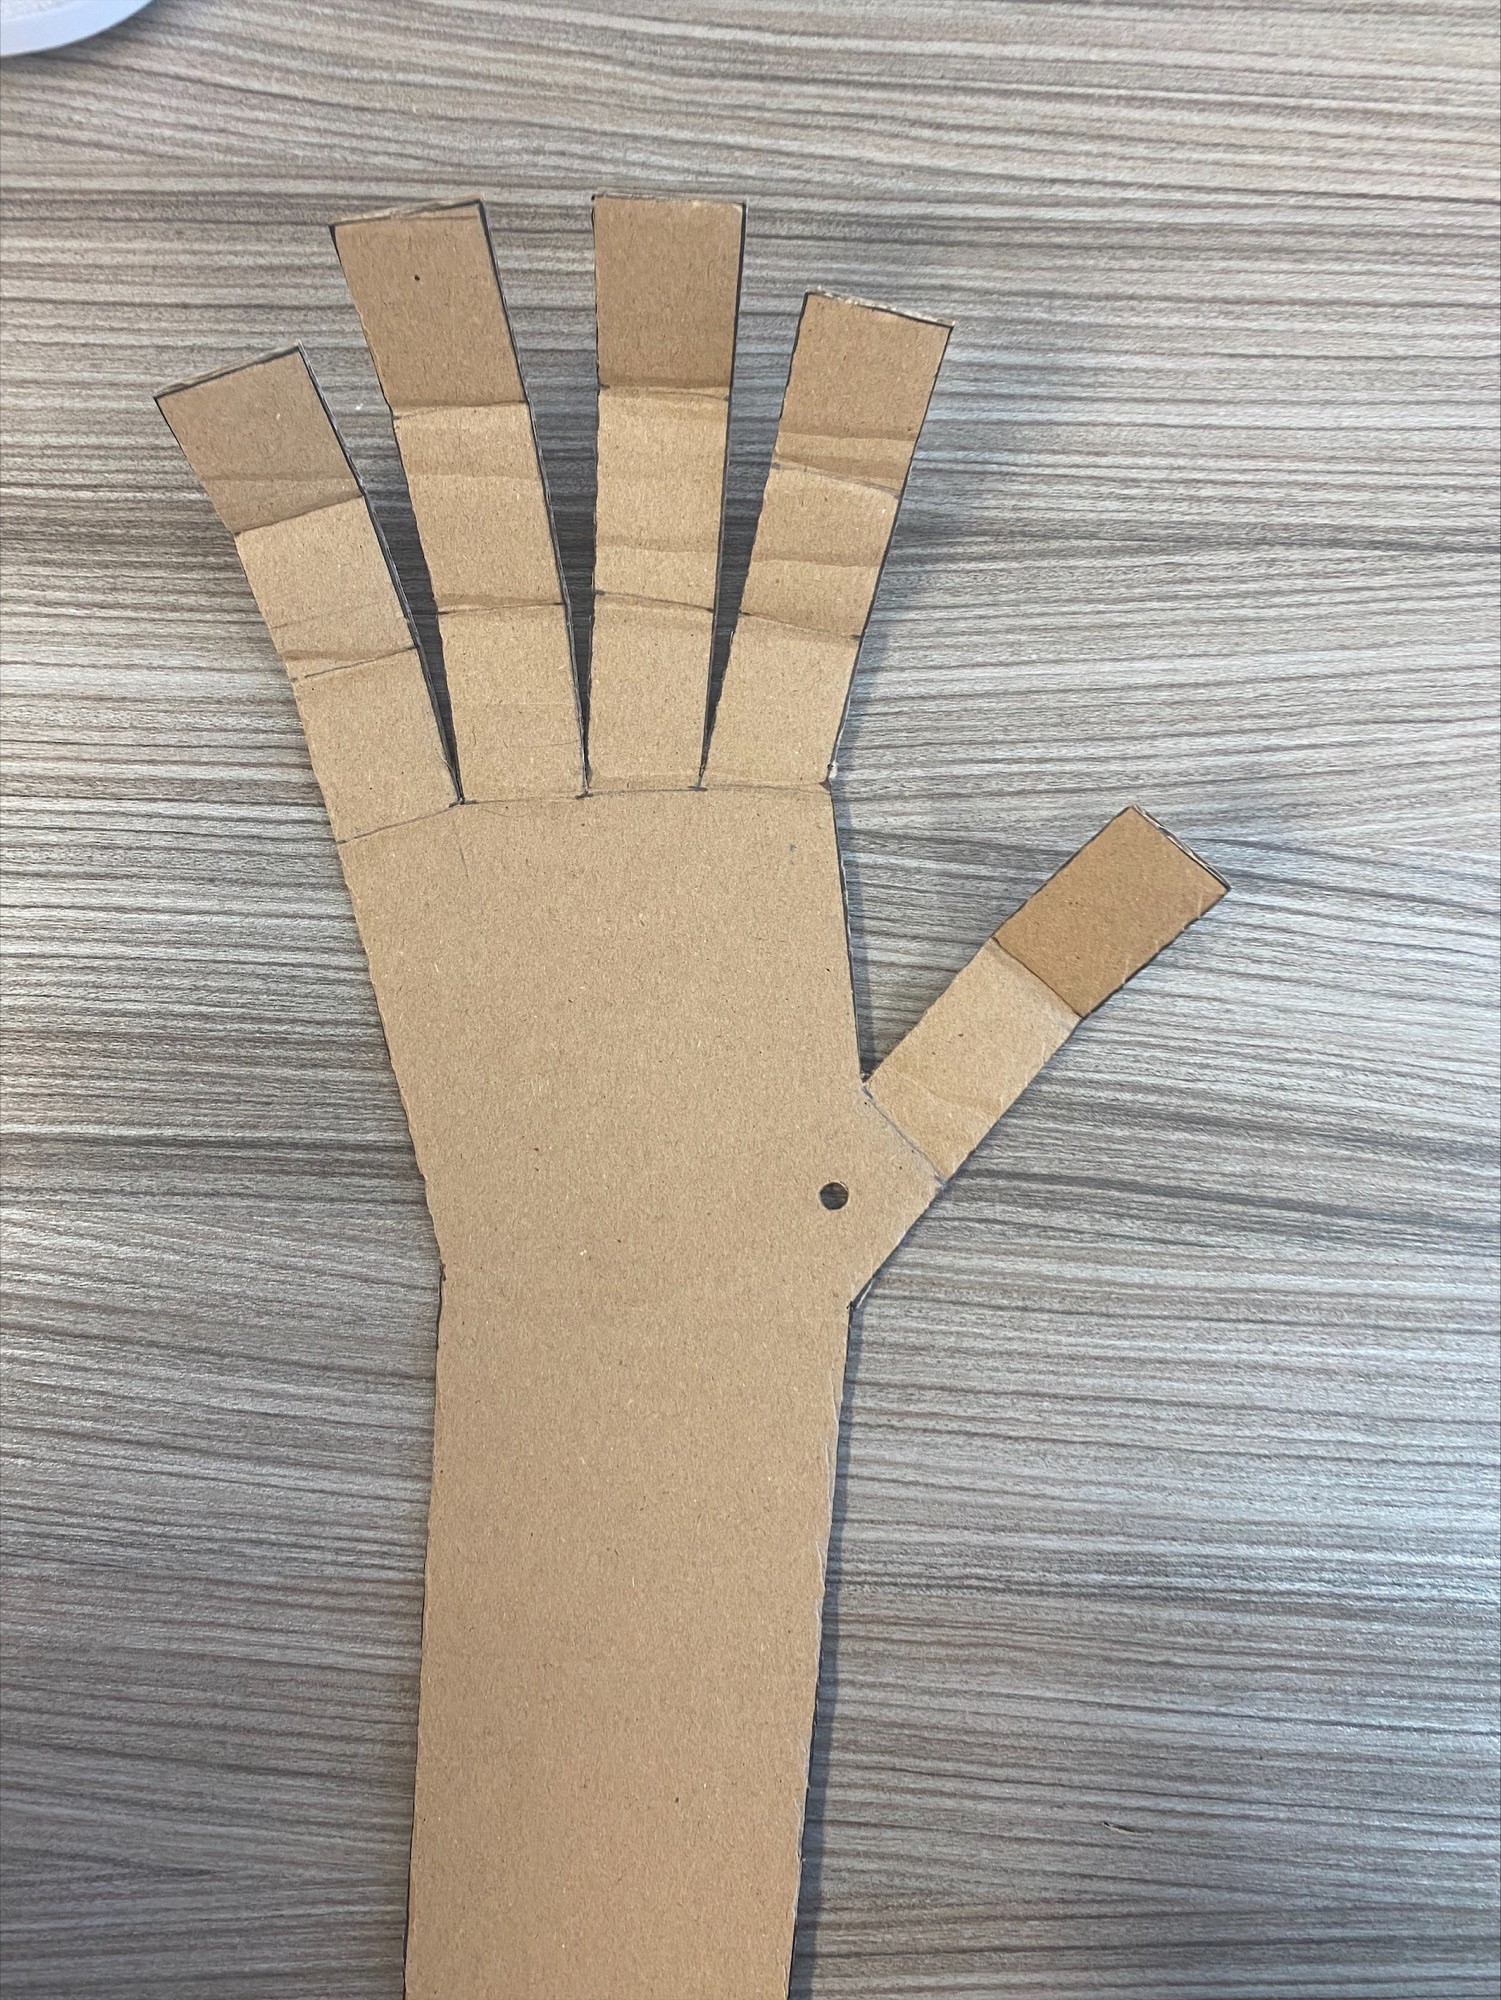 A small hole is made right under the cardboard thumb 